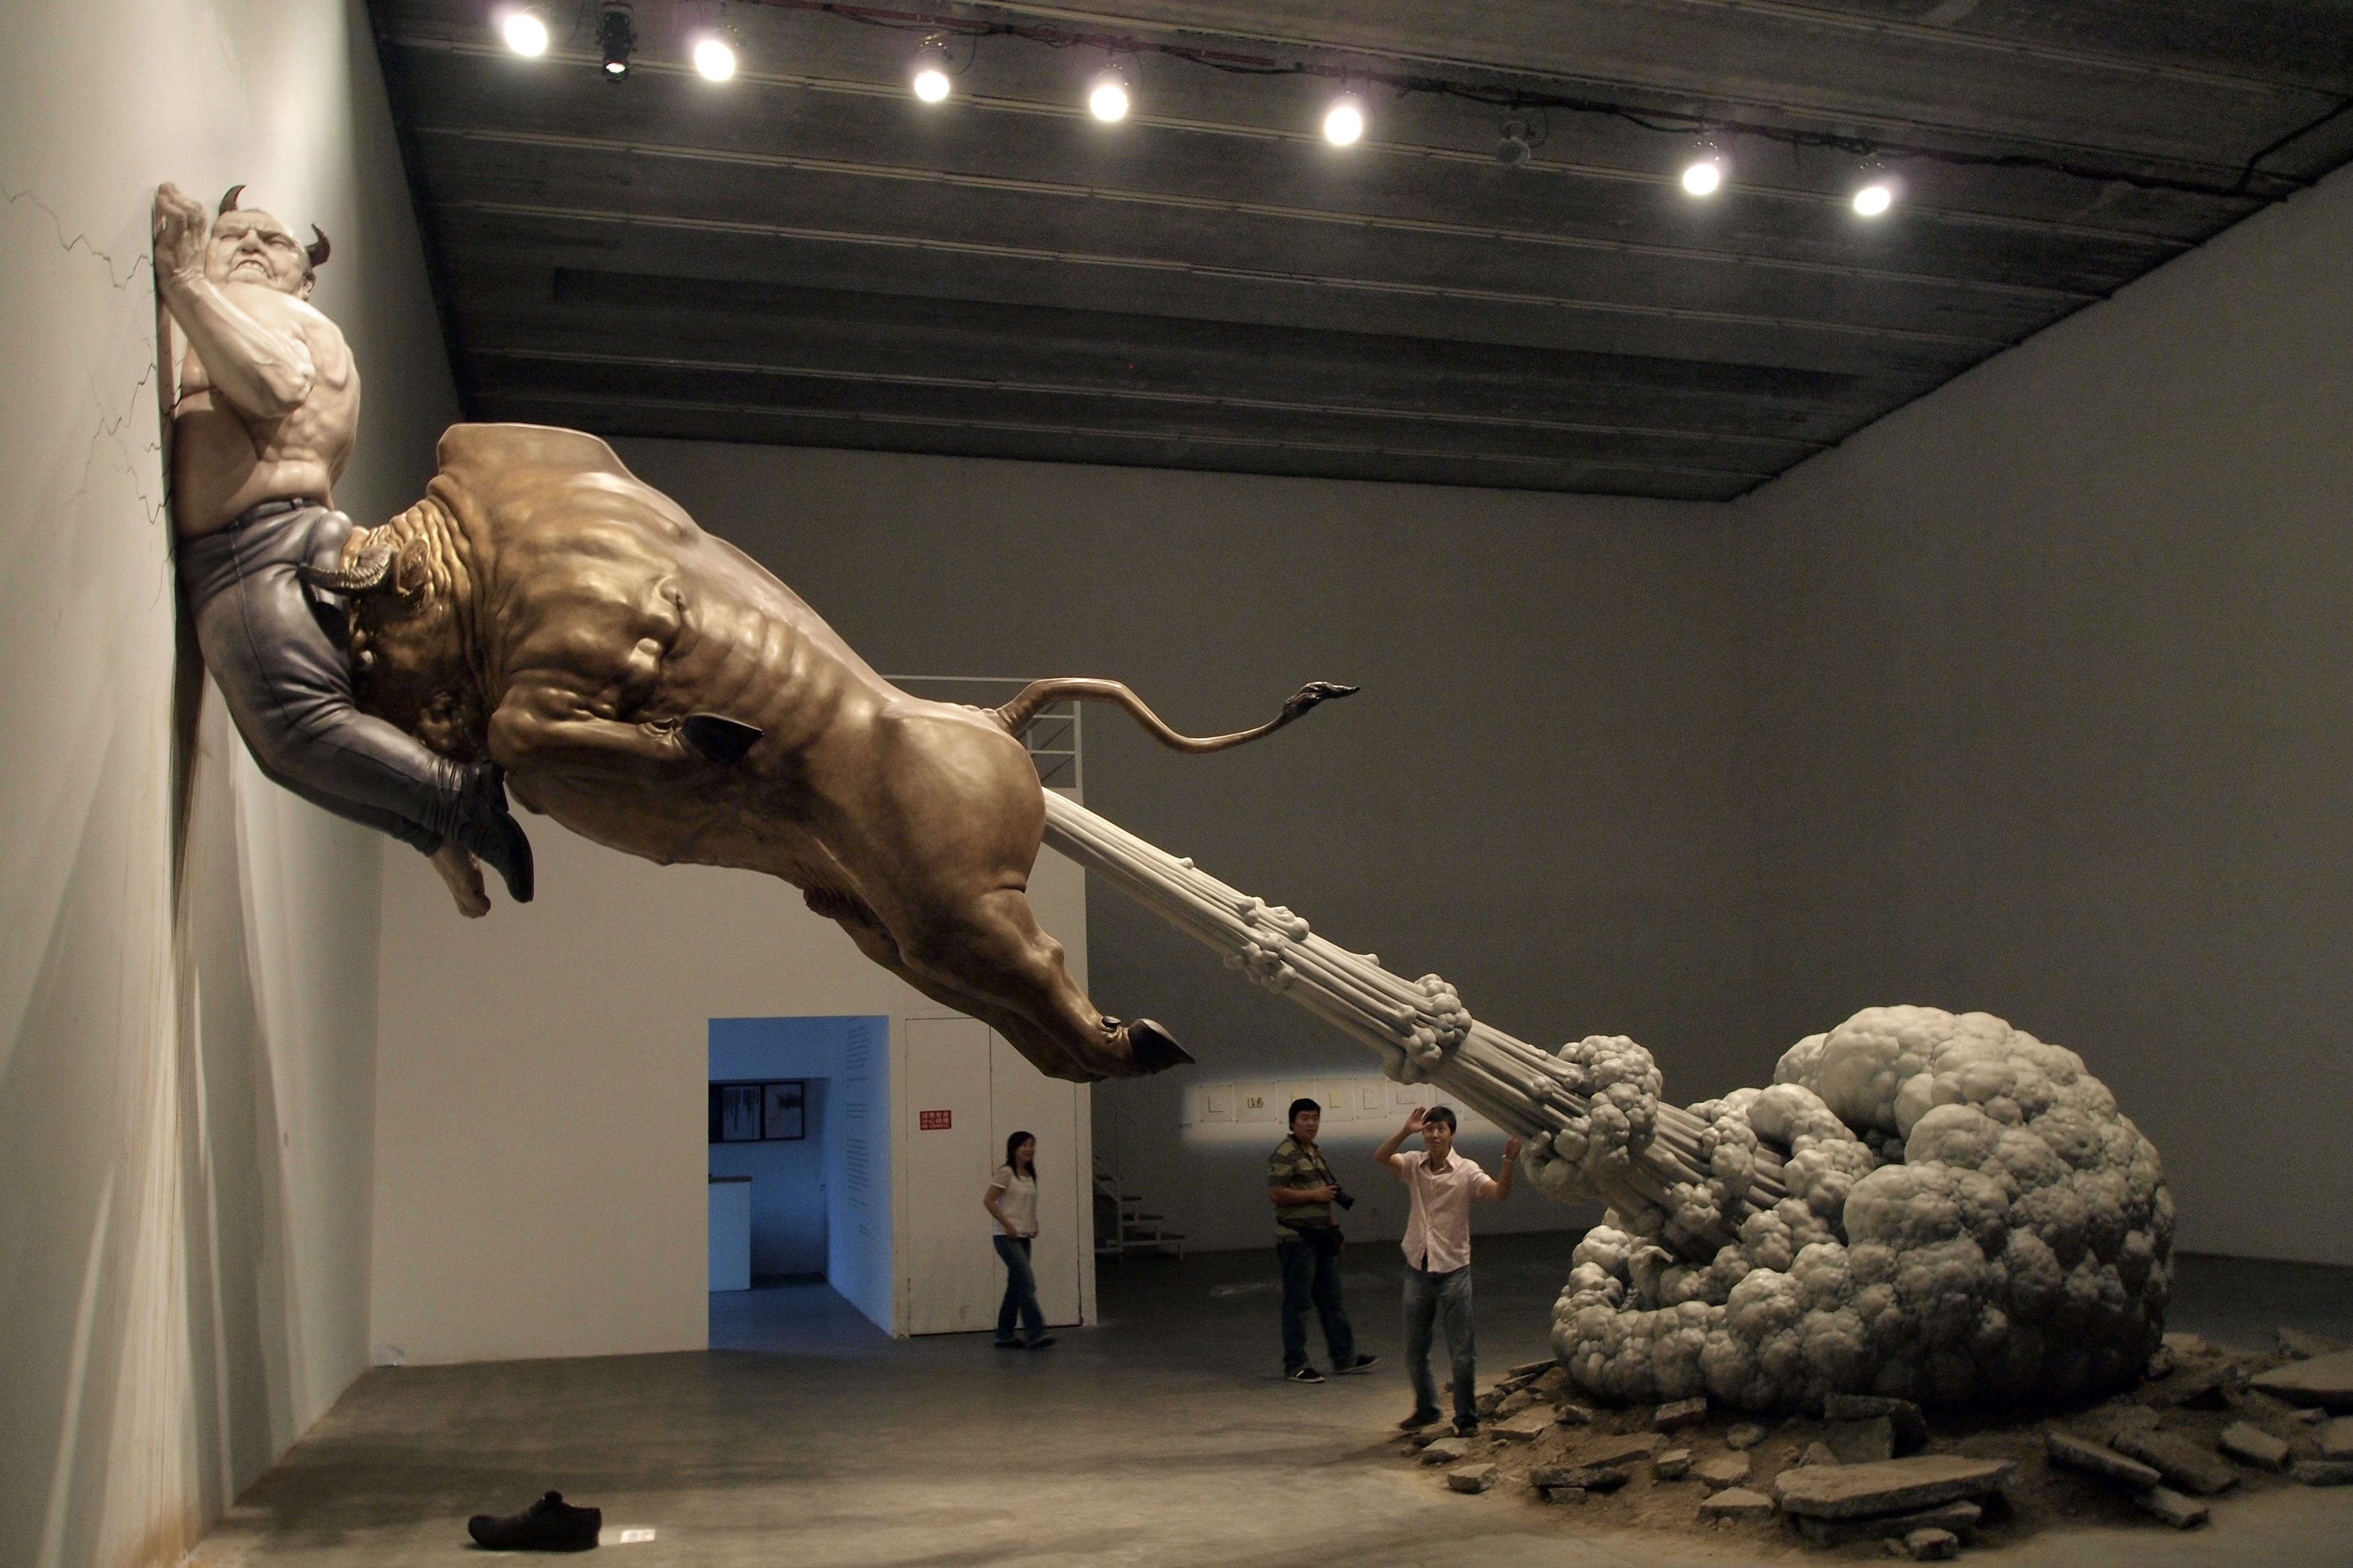 In this photo taken Sunday, Sept. 27, 2009, a sculpture by Chinese artist Chen Wenling entitled "What You See Might Not Be Real" is on display at a gallery in Beijing, China. The artwork is a critique of the global financial crisis with the bull representing the golden bull of wall street and the man pinned to the wall representing the jailed financier Bernard Madoff. (AP Photo/Ng Han Guan)